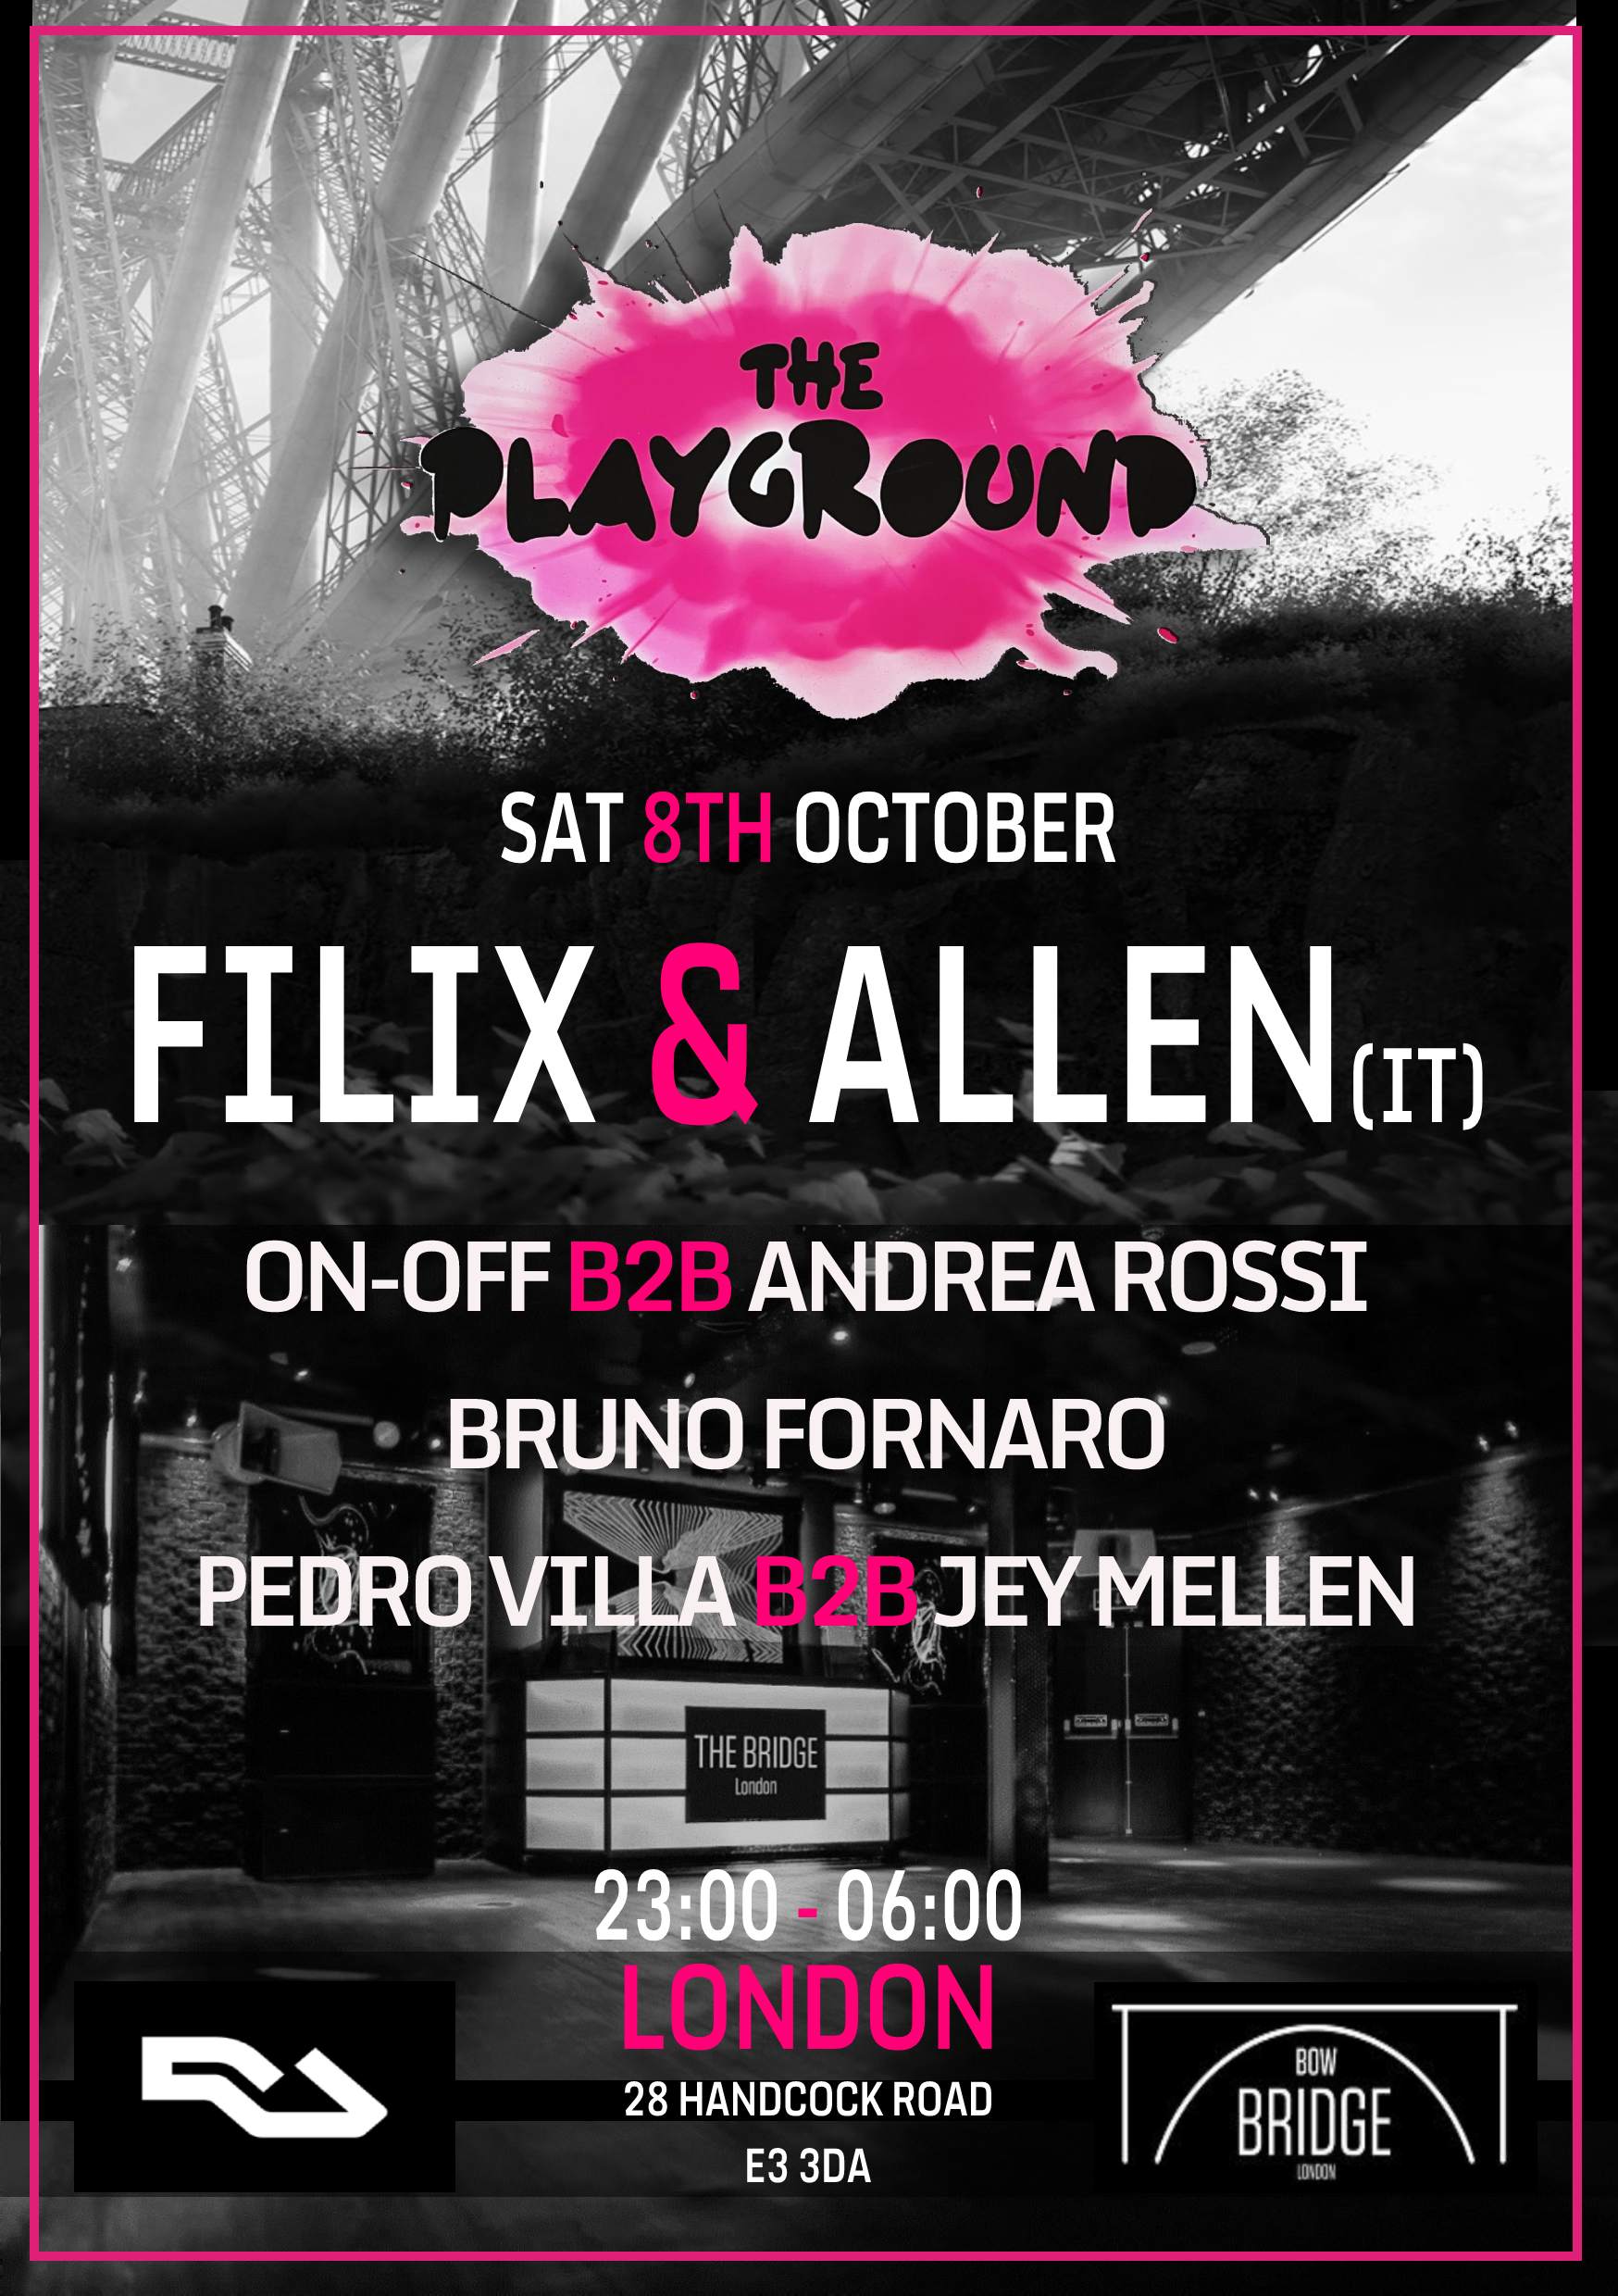 THE PLAYGROUND EVENTS with Allen & Filix - Página frontal